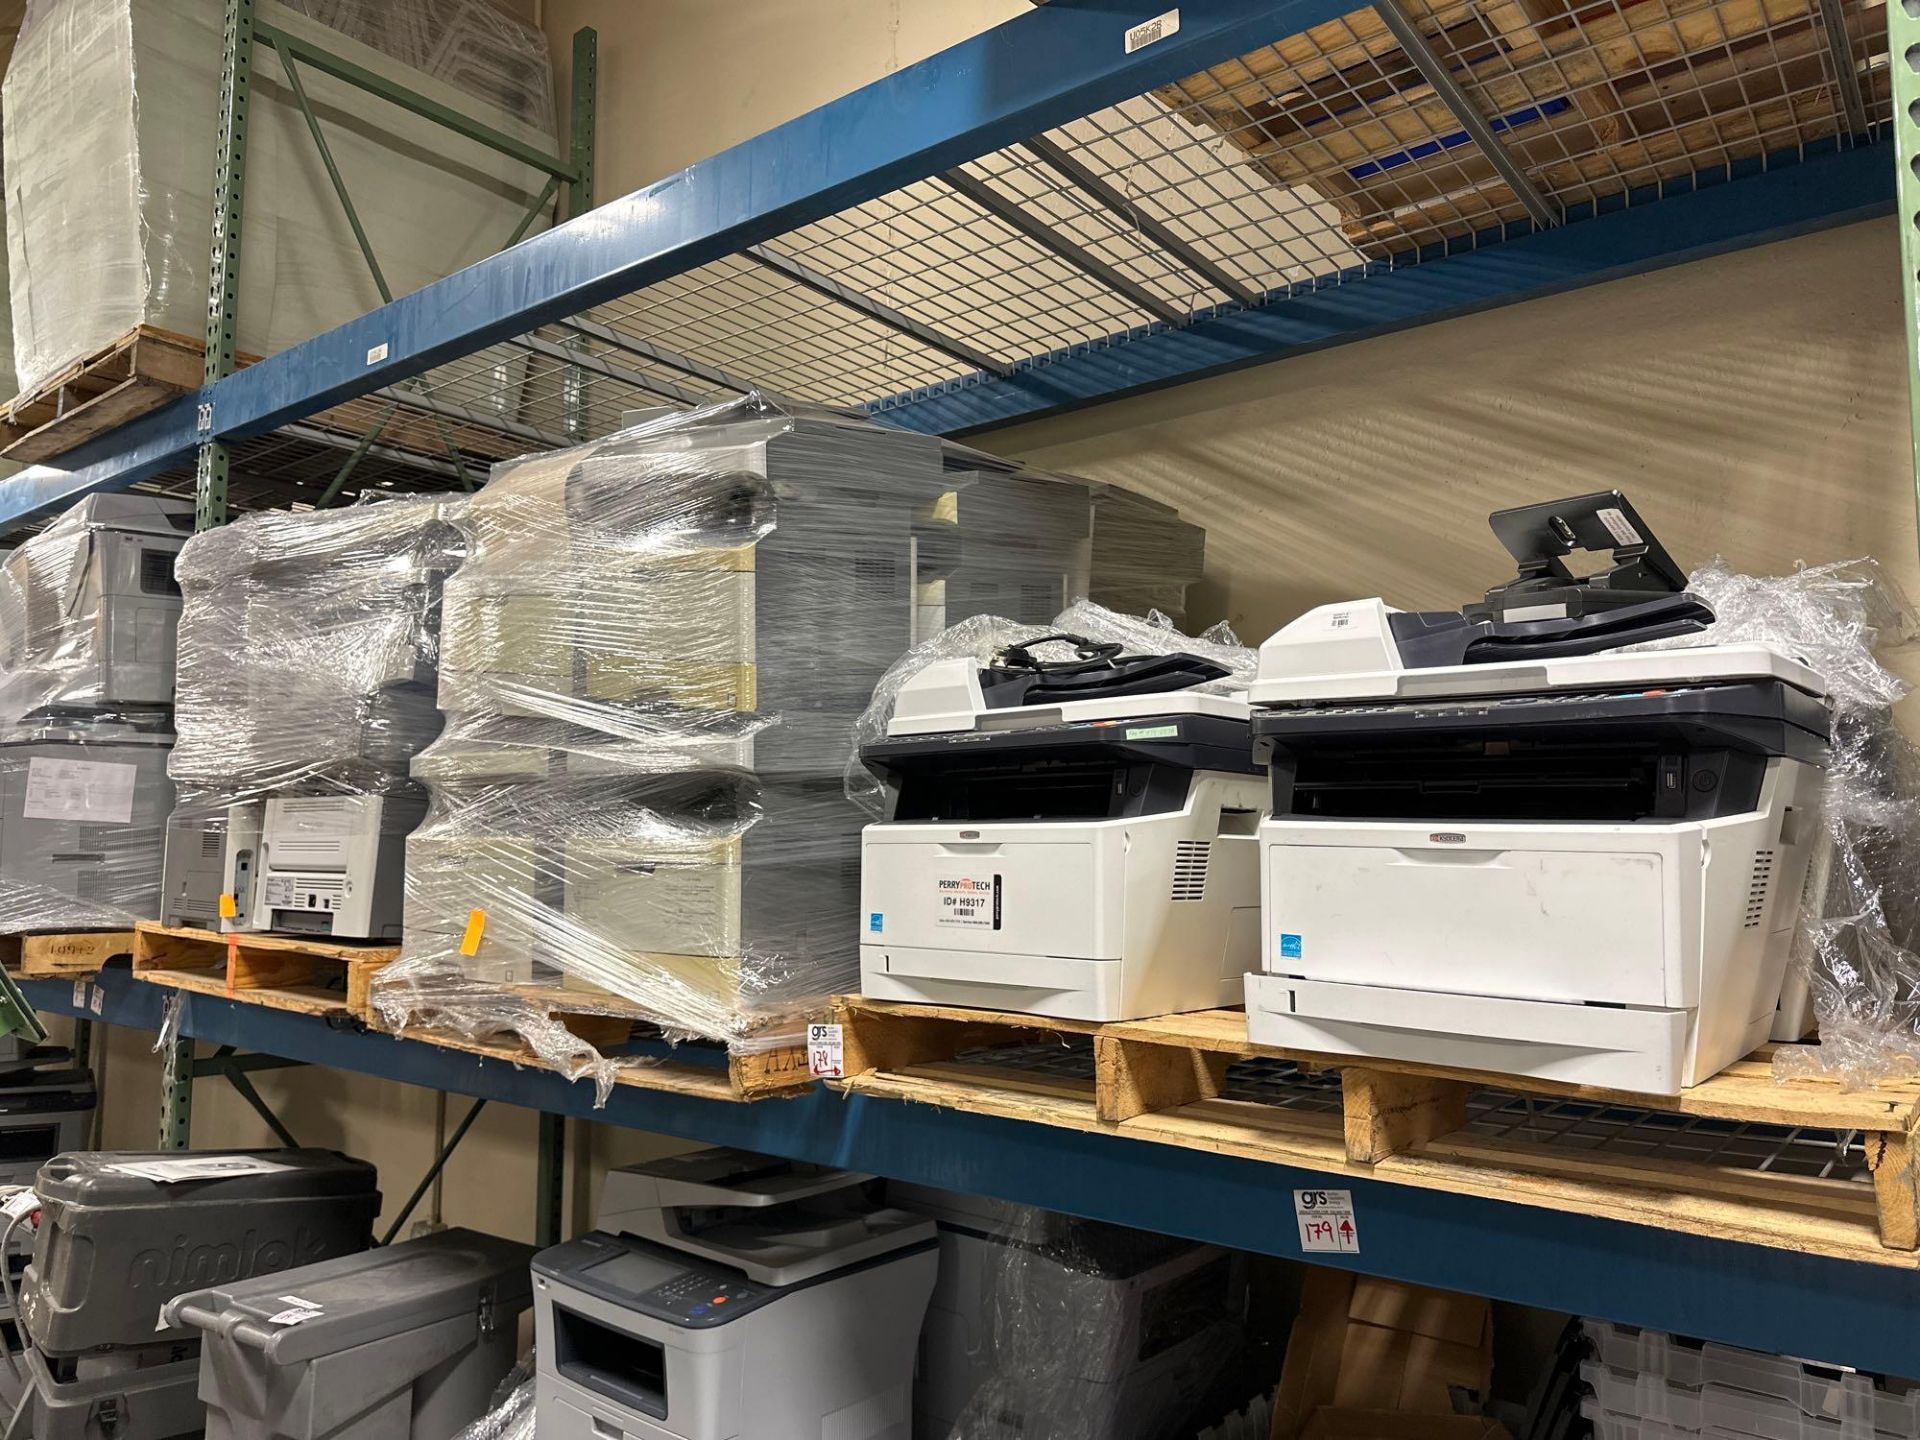 Pallets of Assorted Printers